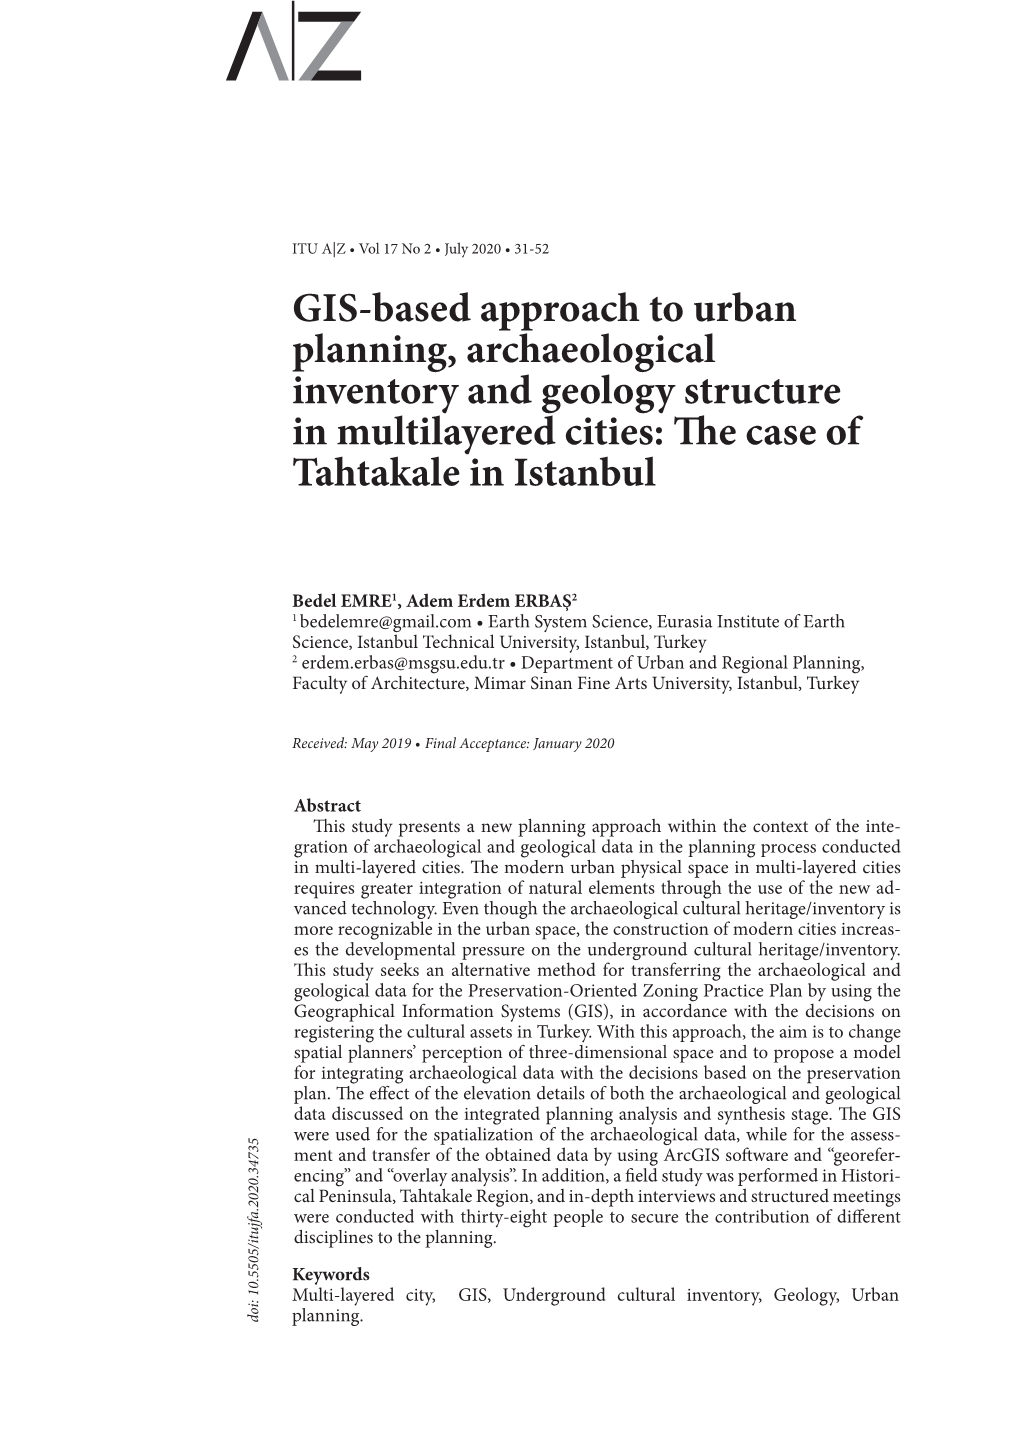 GIS-Based Approach to Urban Planning, Archaeological Inventory and Geology Structure in Multilayered Cities: the Case of Tahtakale in Istanbul